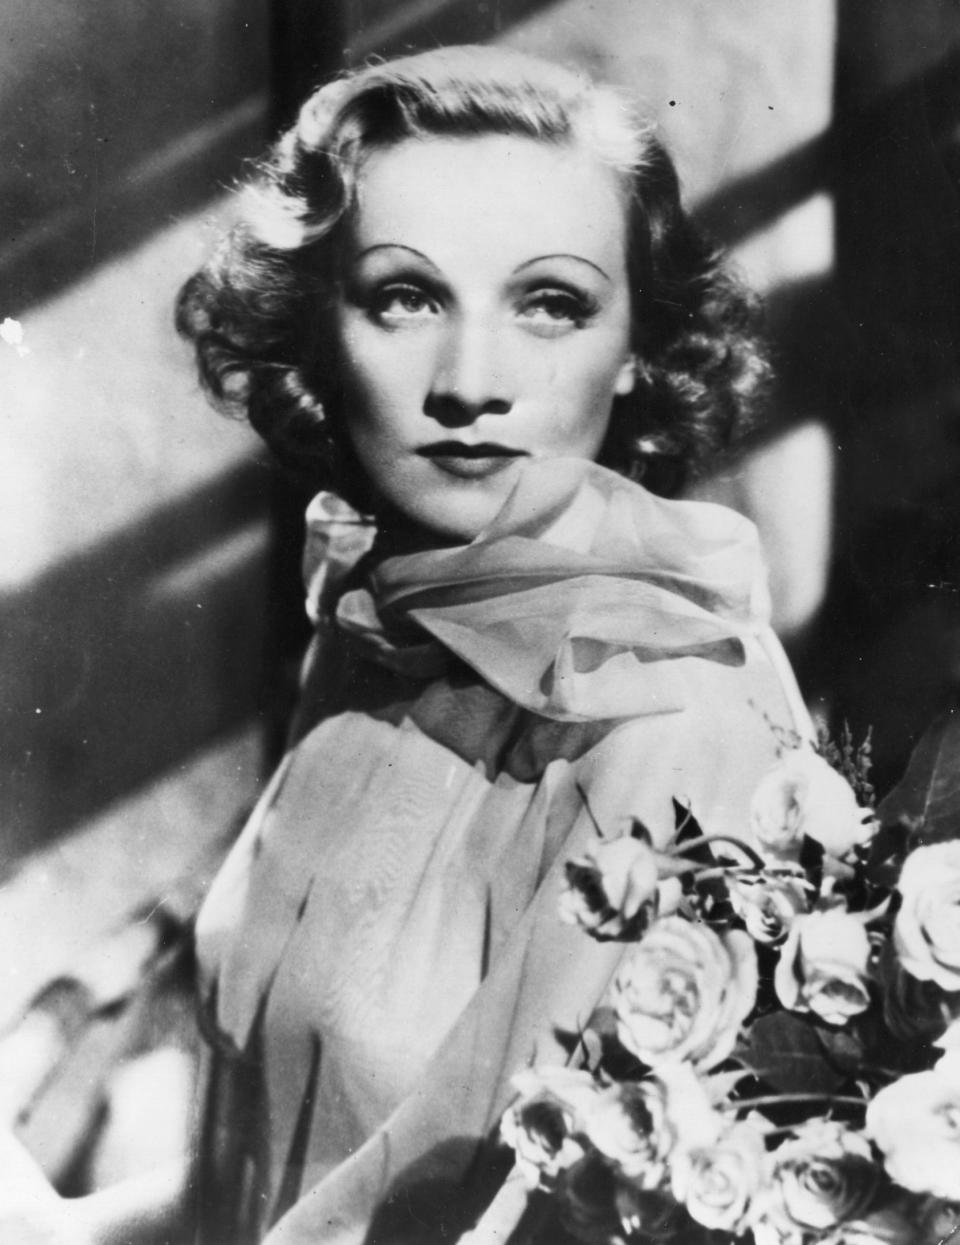 A Look at Marlene Dietrich and Her Trailblazing Modern Style